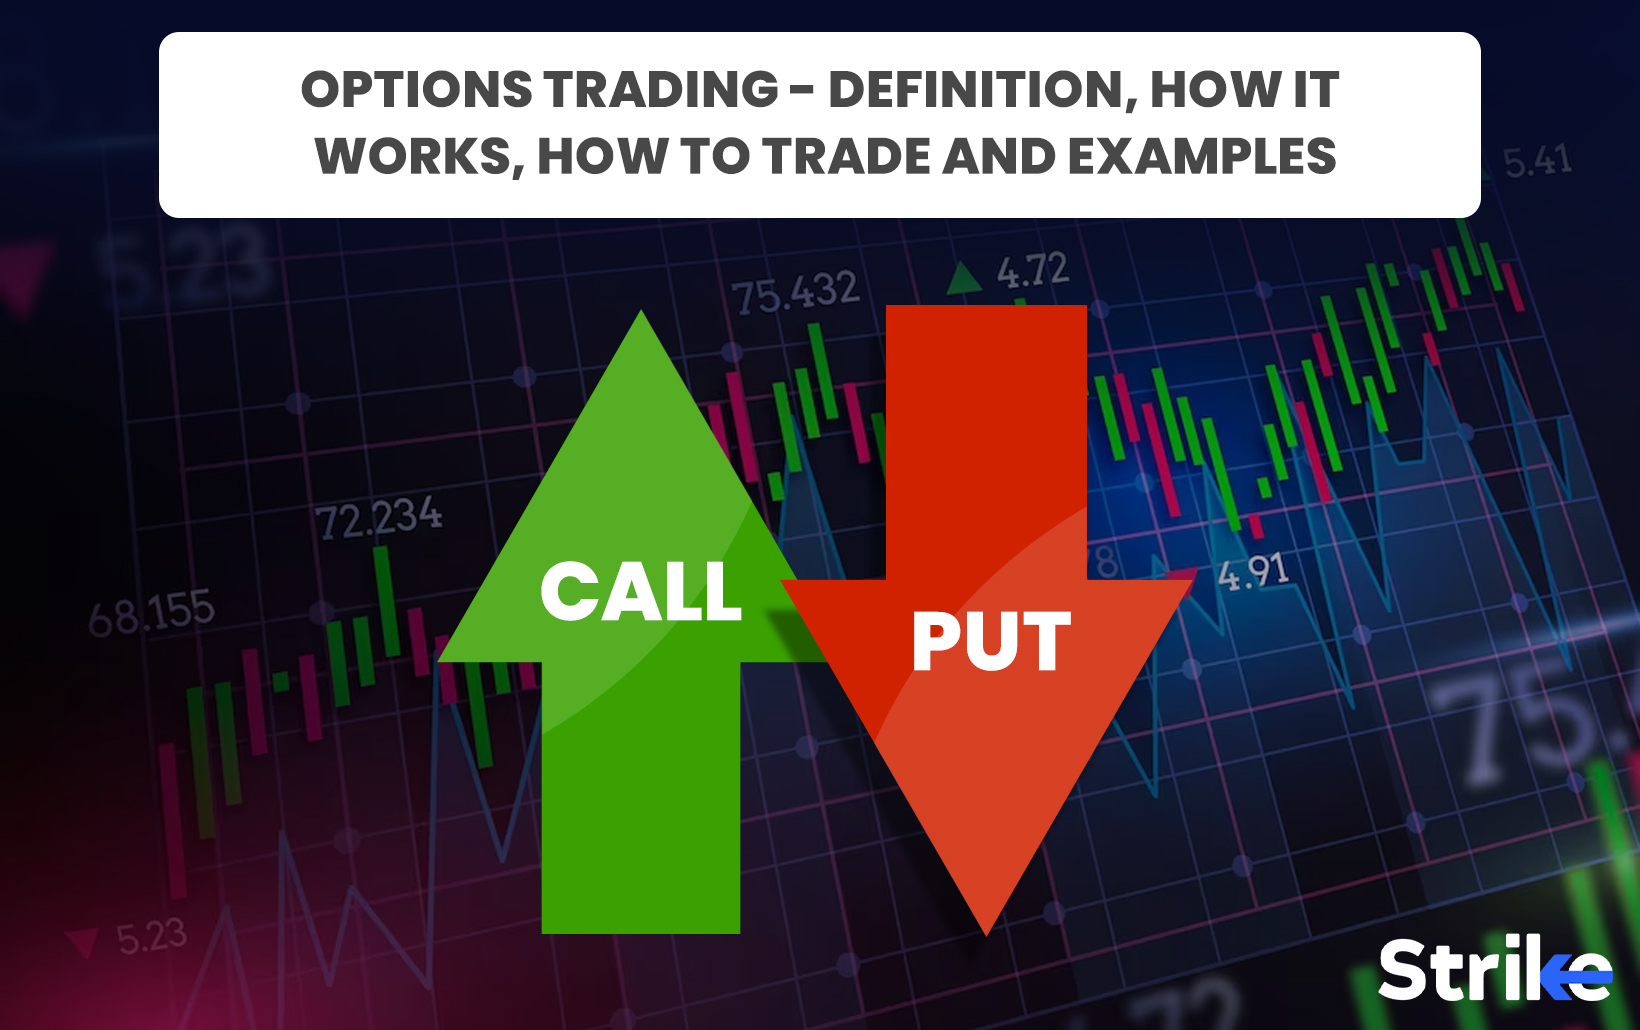 Options Trading – Definition, How it works, how to trade, and examples